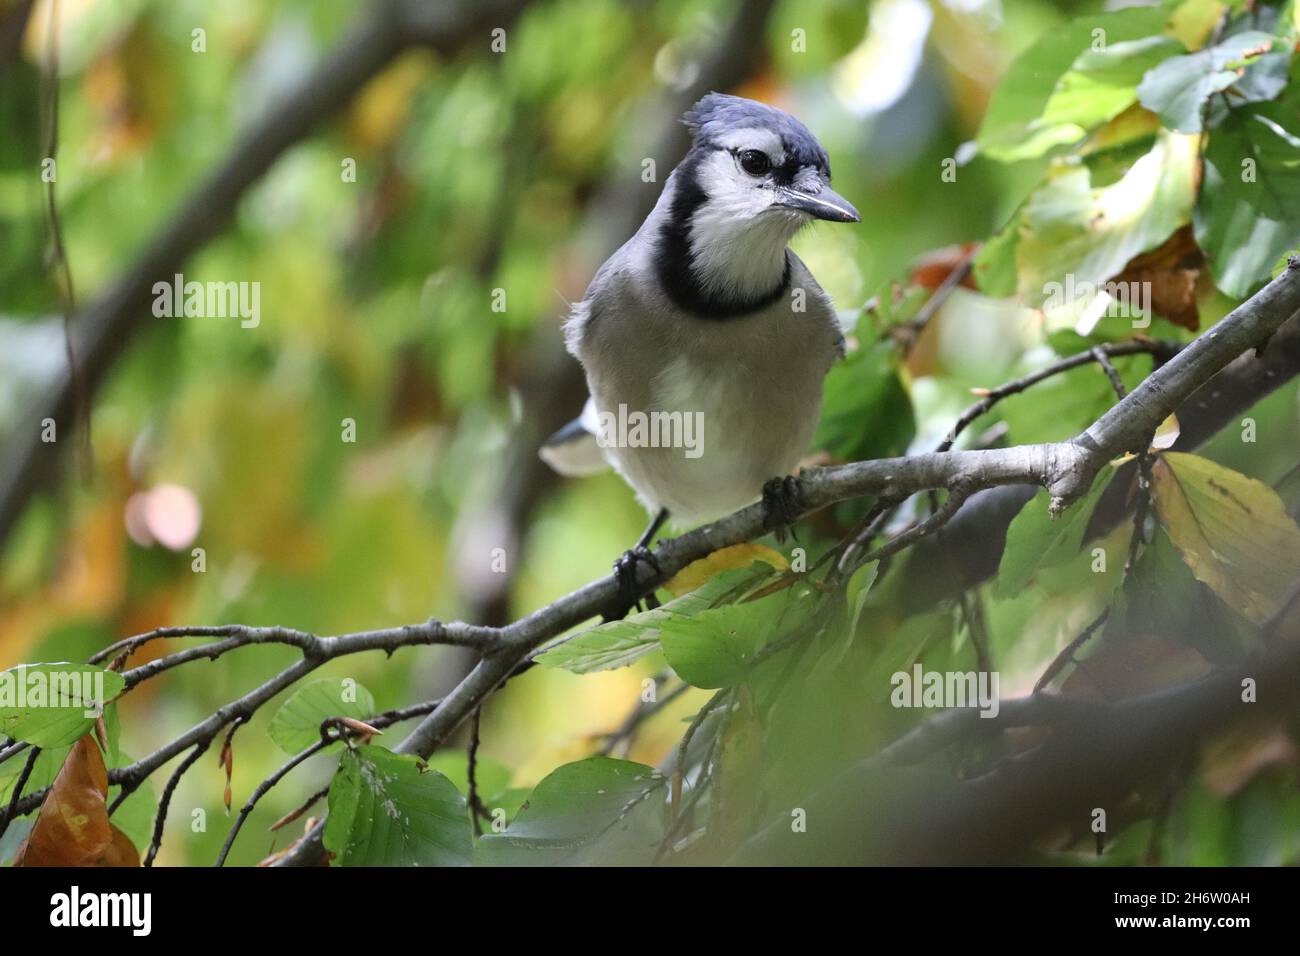 Closeup shot of a blue jay perched on a tree branch in Halifax, Germany Stock Photo